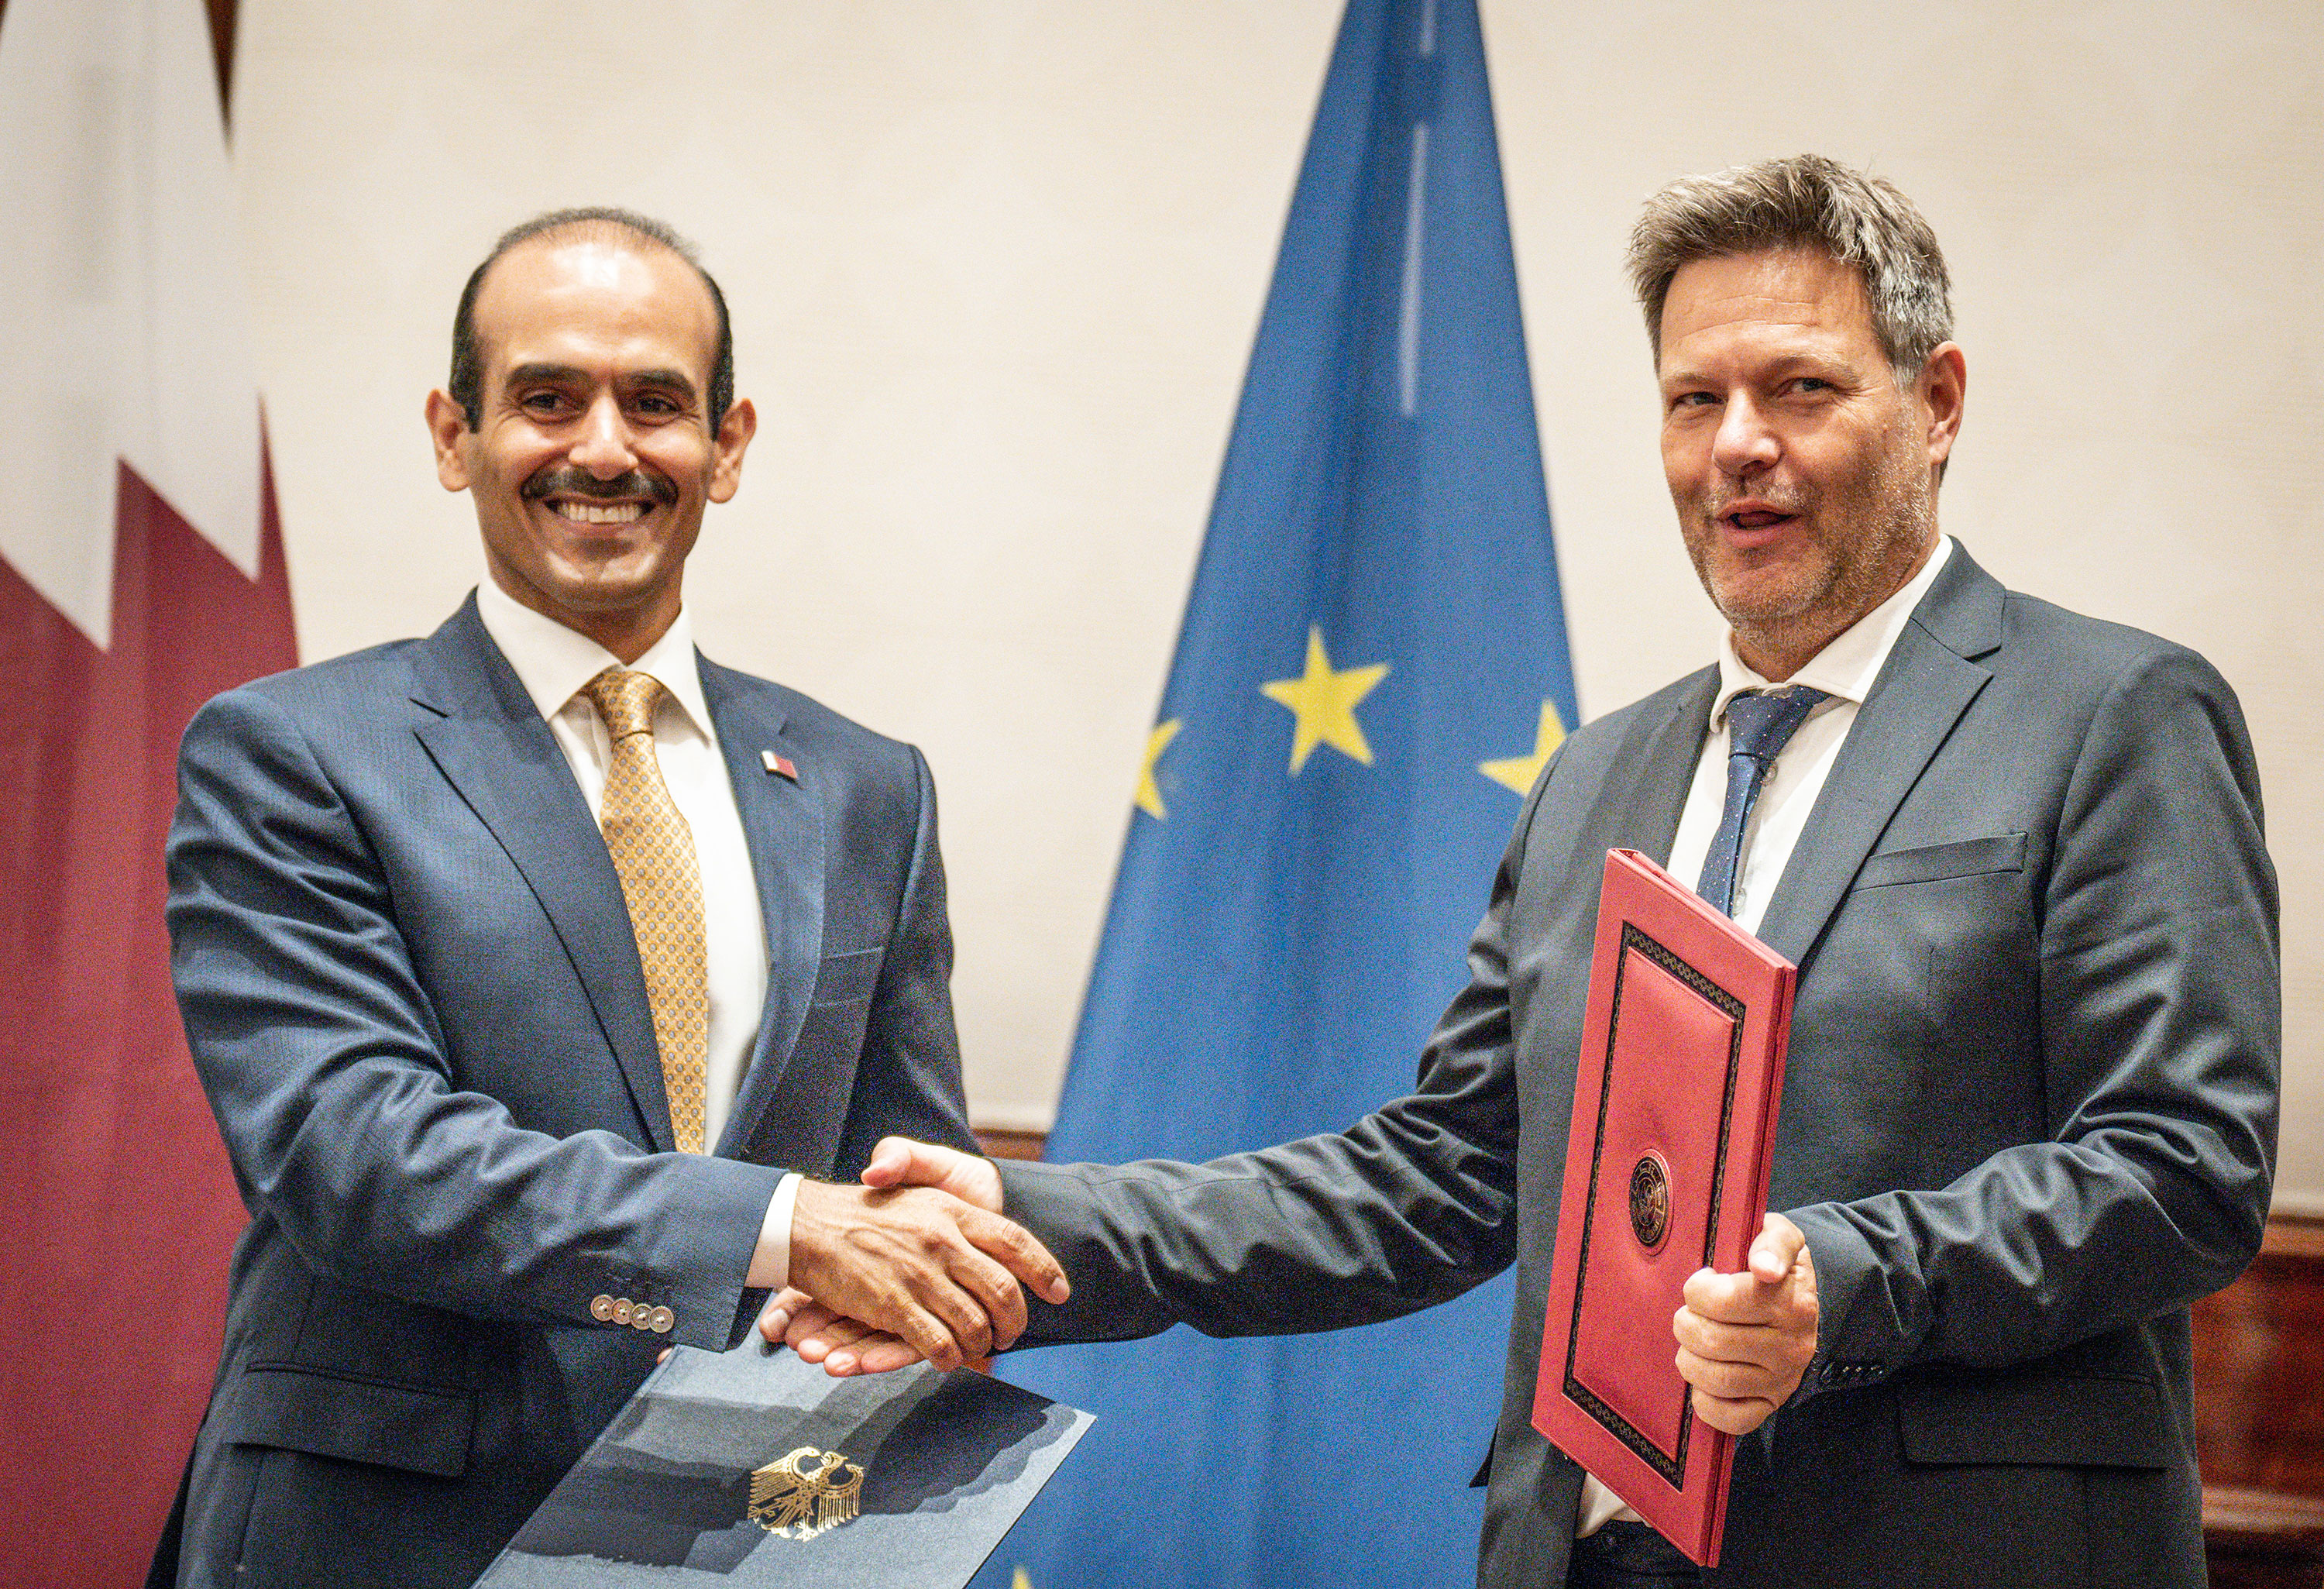 Qatari Minister of State for Energy Saad Sherida Al-Kaabi shakes hands with German Federal Minister for Economic Affairs and Climate Protection Robert Habeck after they signed a new energy partnership between their countries on Friday.